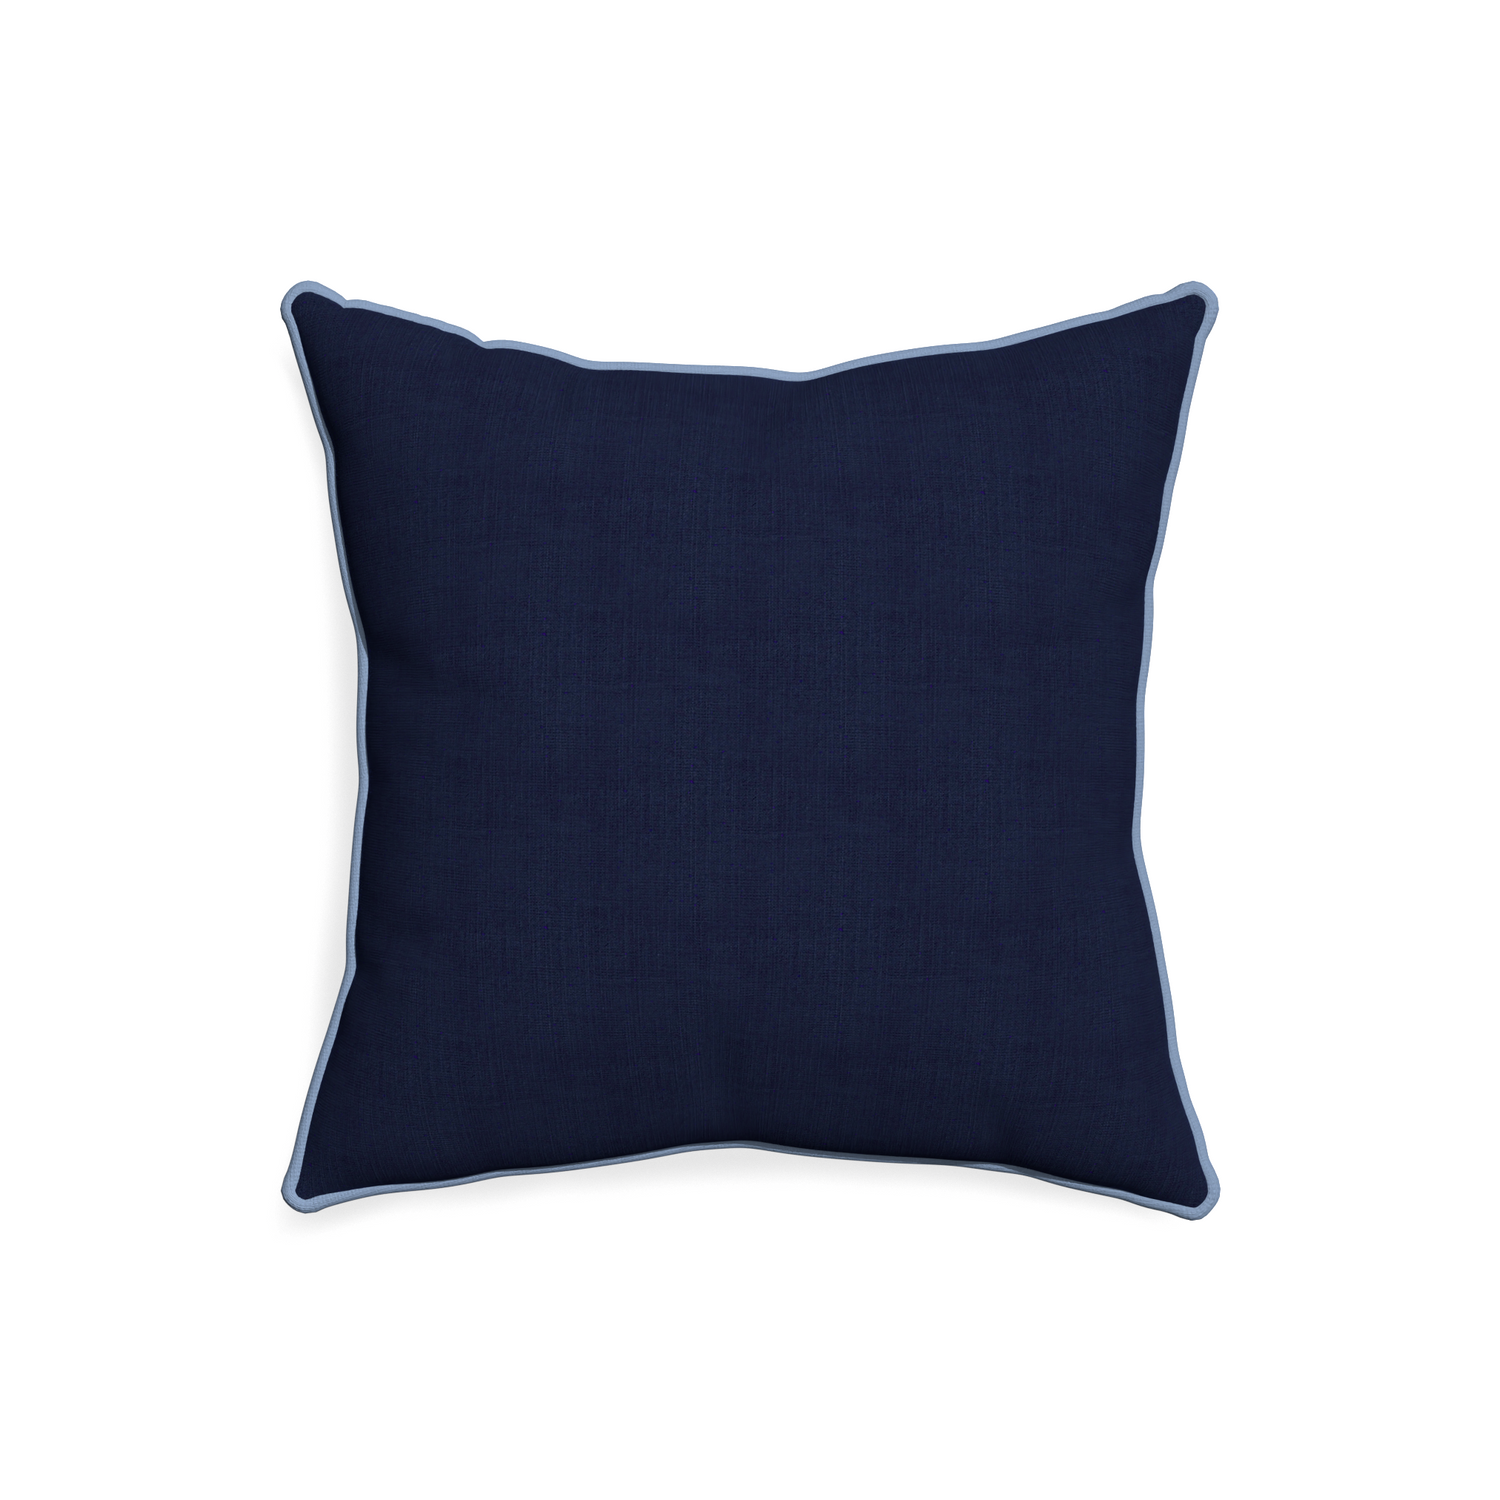 20-square midnight custom navy bluepillow with sky piping on white background